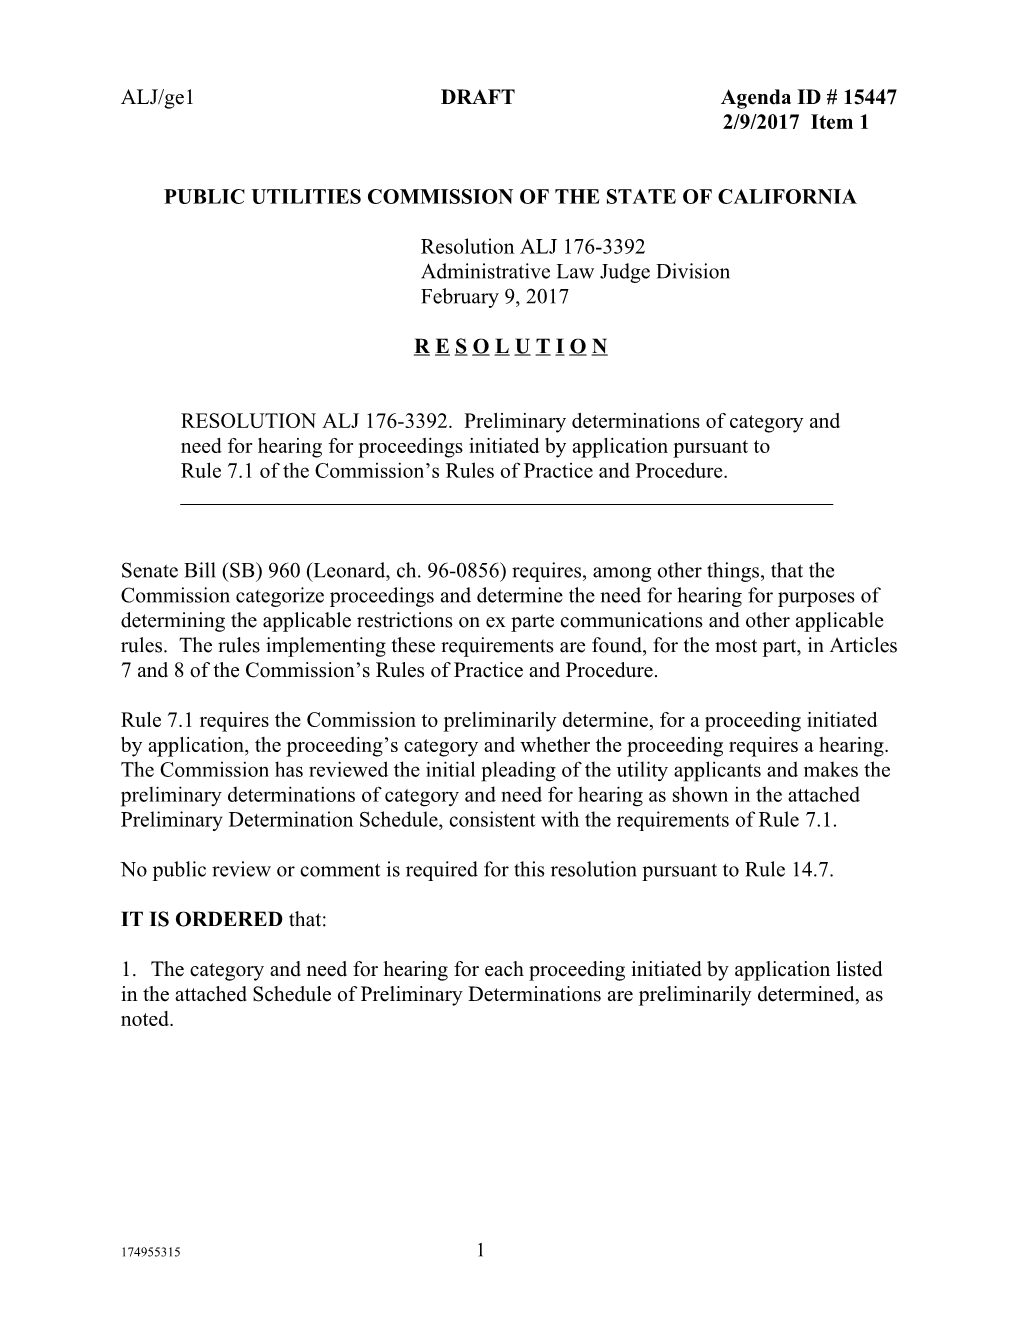 Public Utilities Commission of the State of California s40